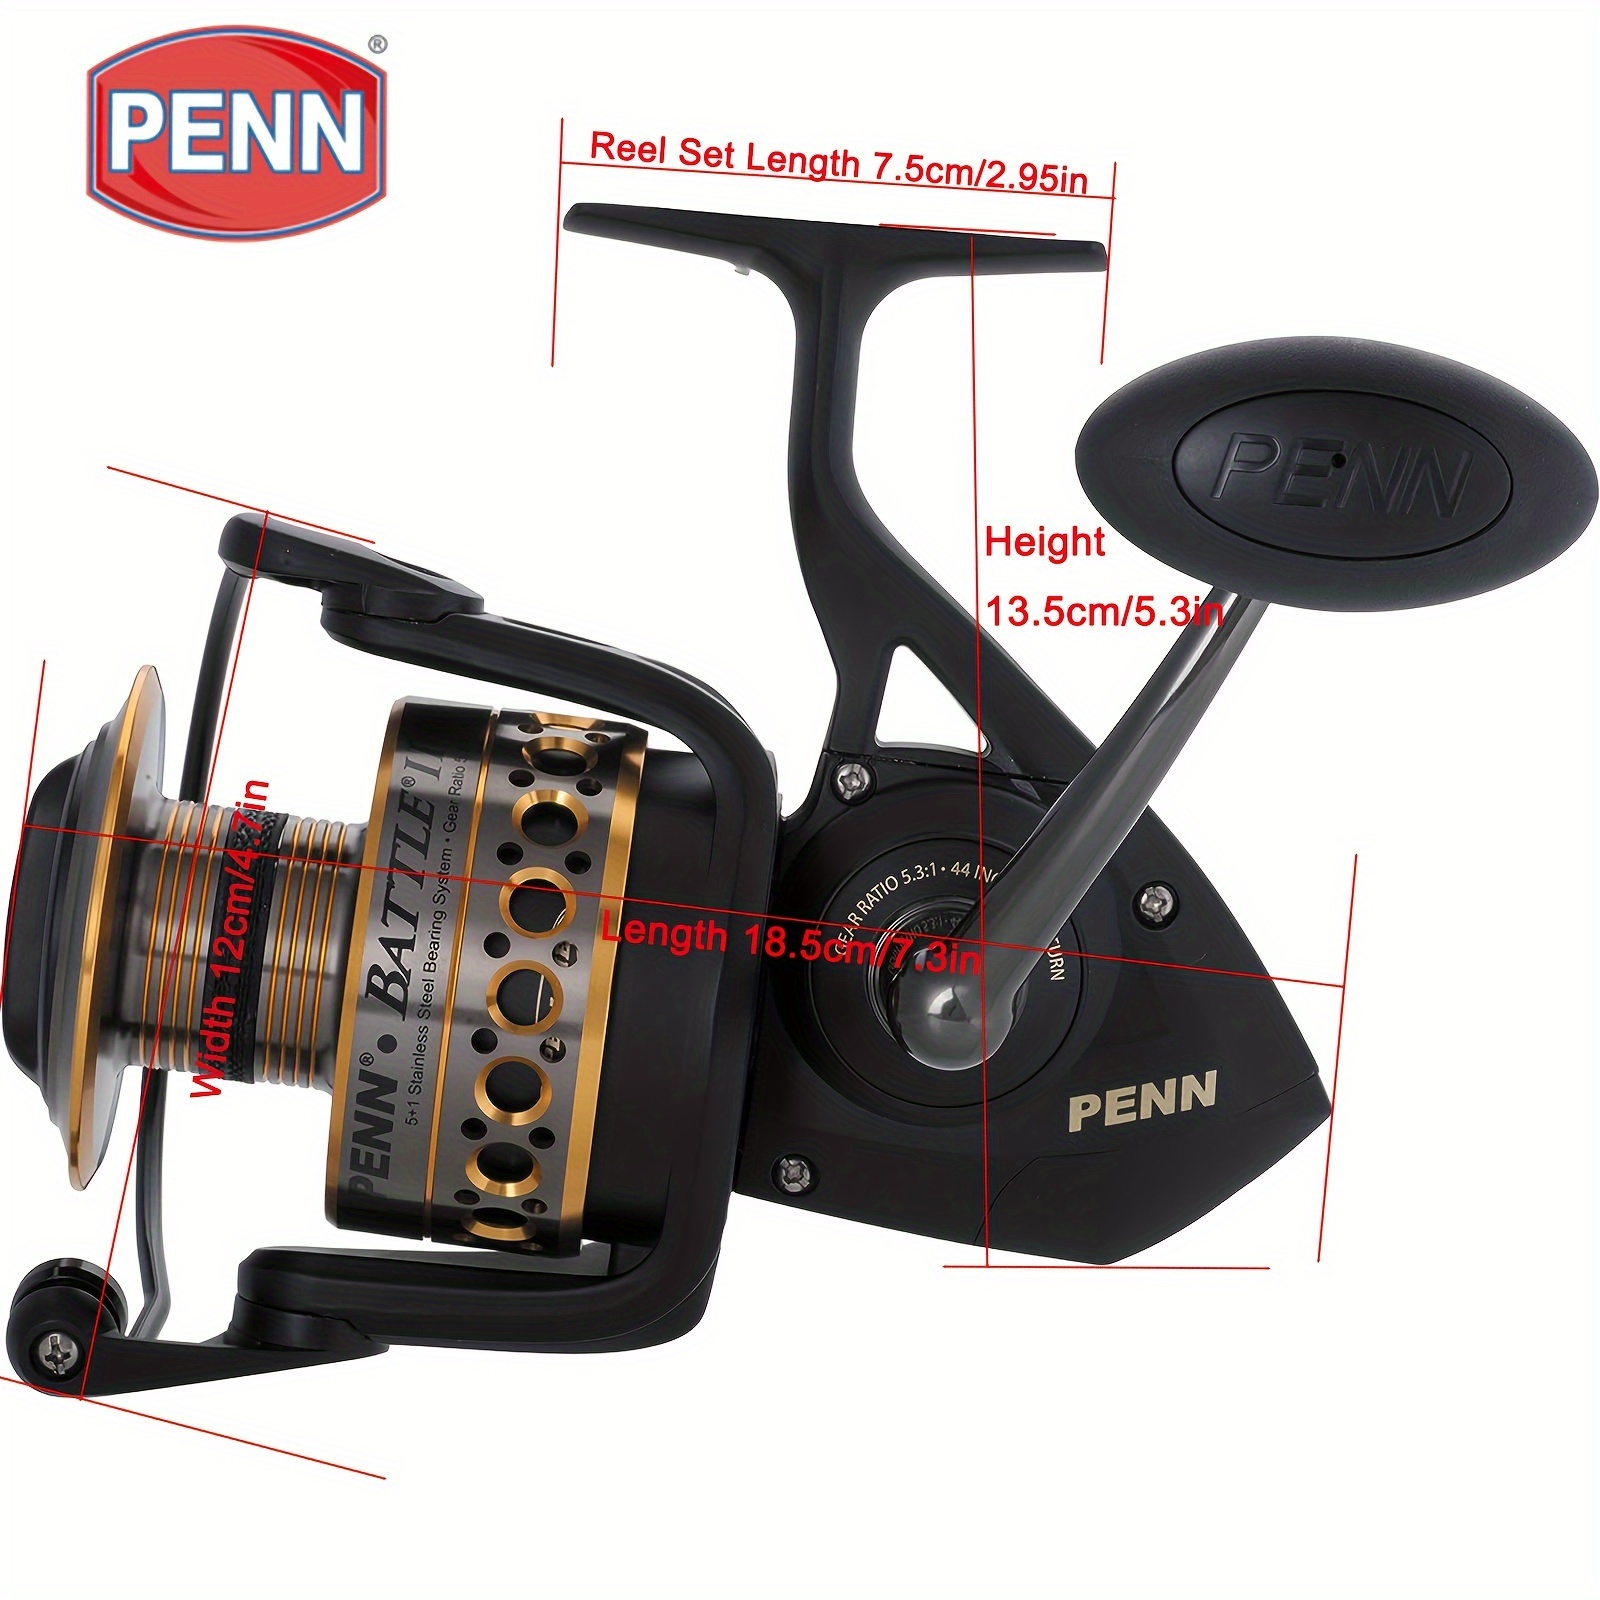 1pc Spinning Reel, HT-100 Front Drag System, 5+1BB Carbon Fiber Drag  System, 5.3:1 Gear Ratio, For Saltwater Fishing, Fishing Accessories